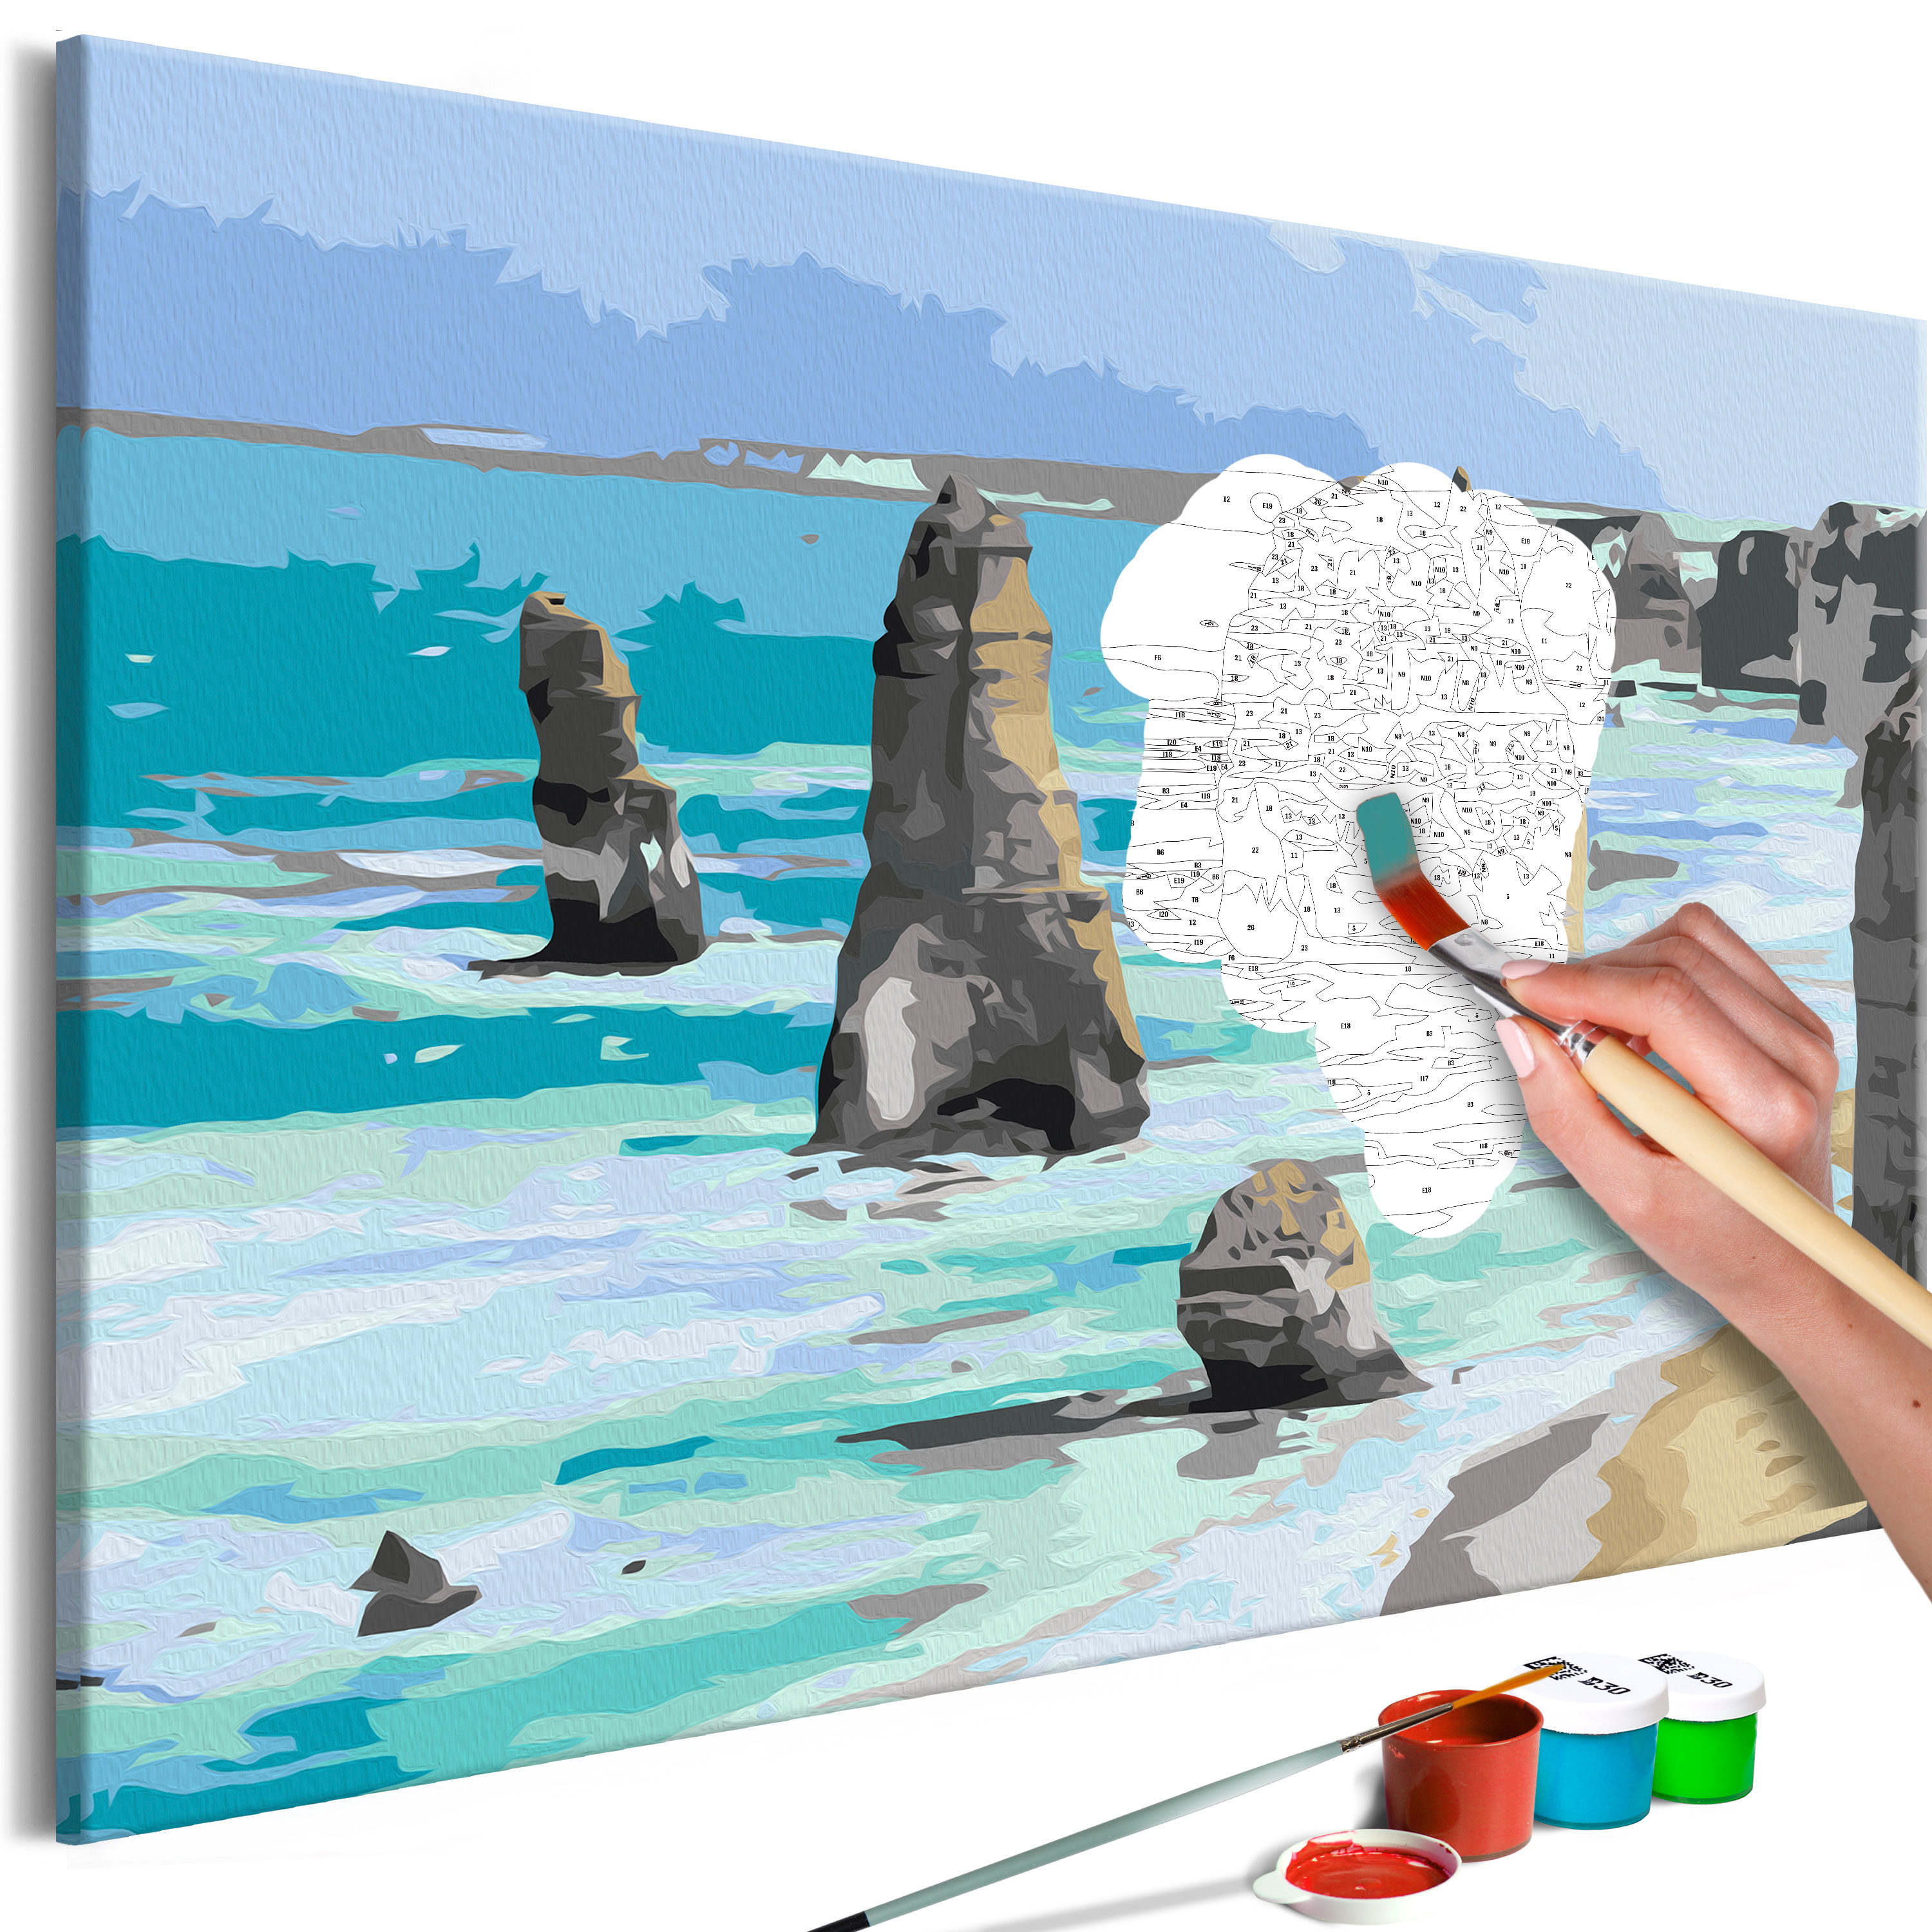 DIY canvas painting - Rocks in the Sea - 60x40